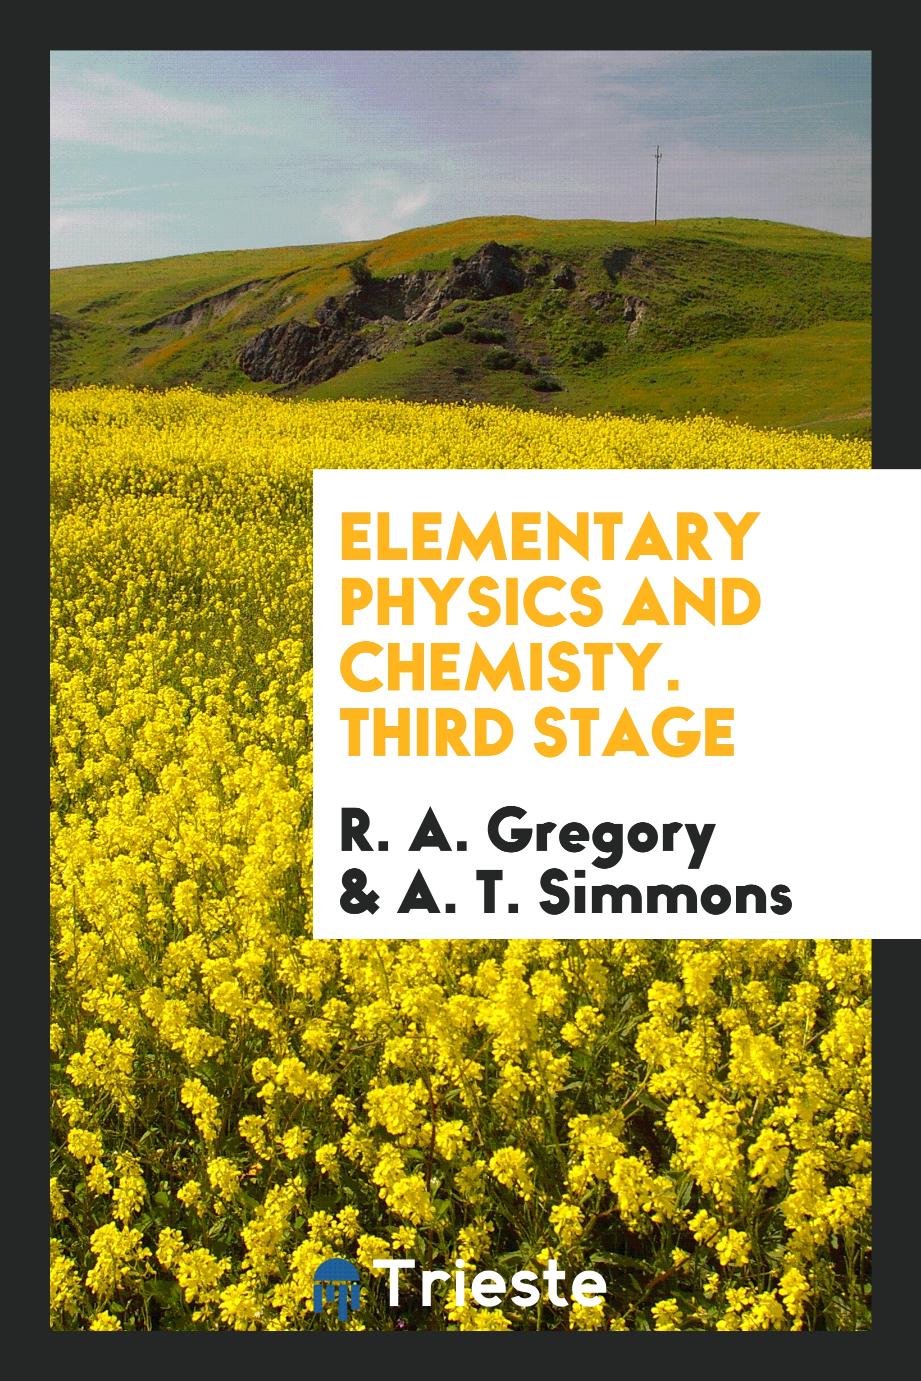 R.  A. Gregory, A. T. Simmons - Elementary Physics and Chemisty. Third Stage